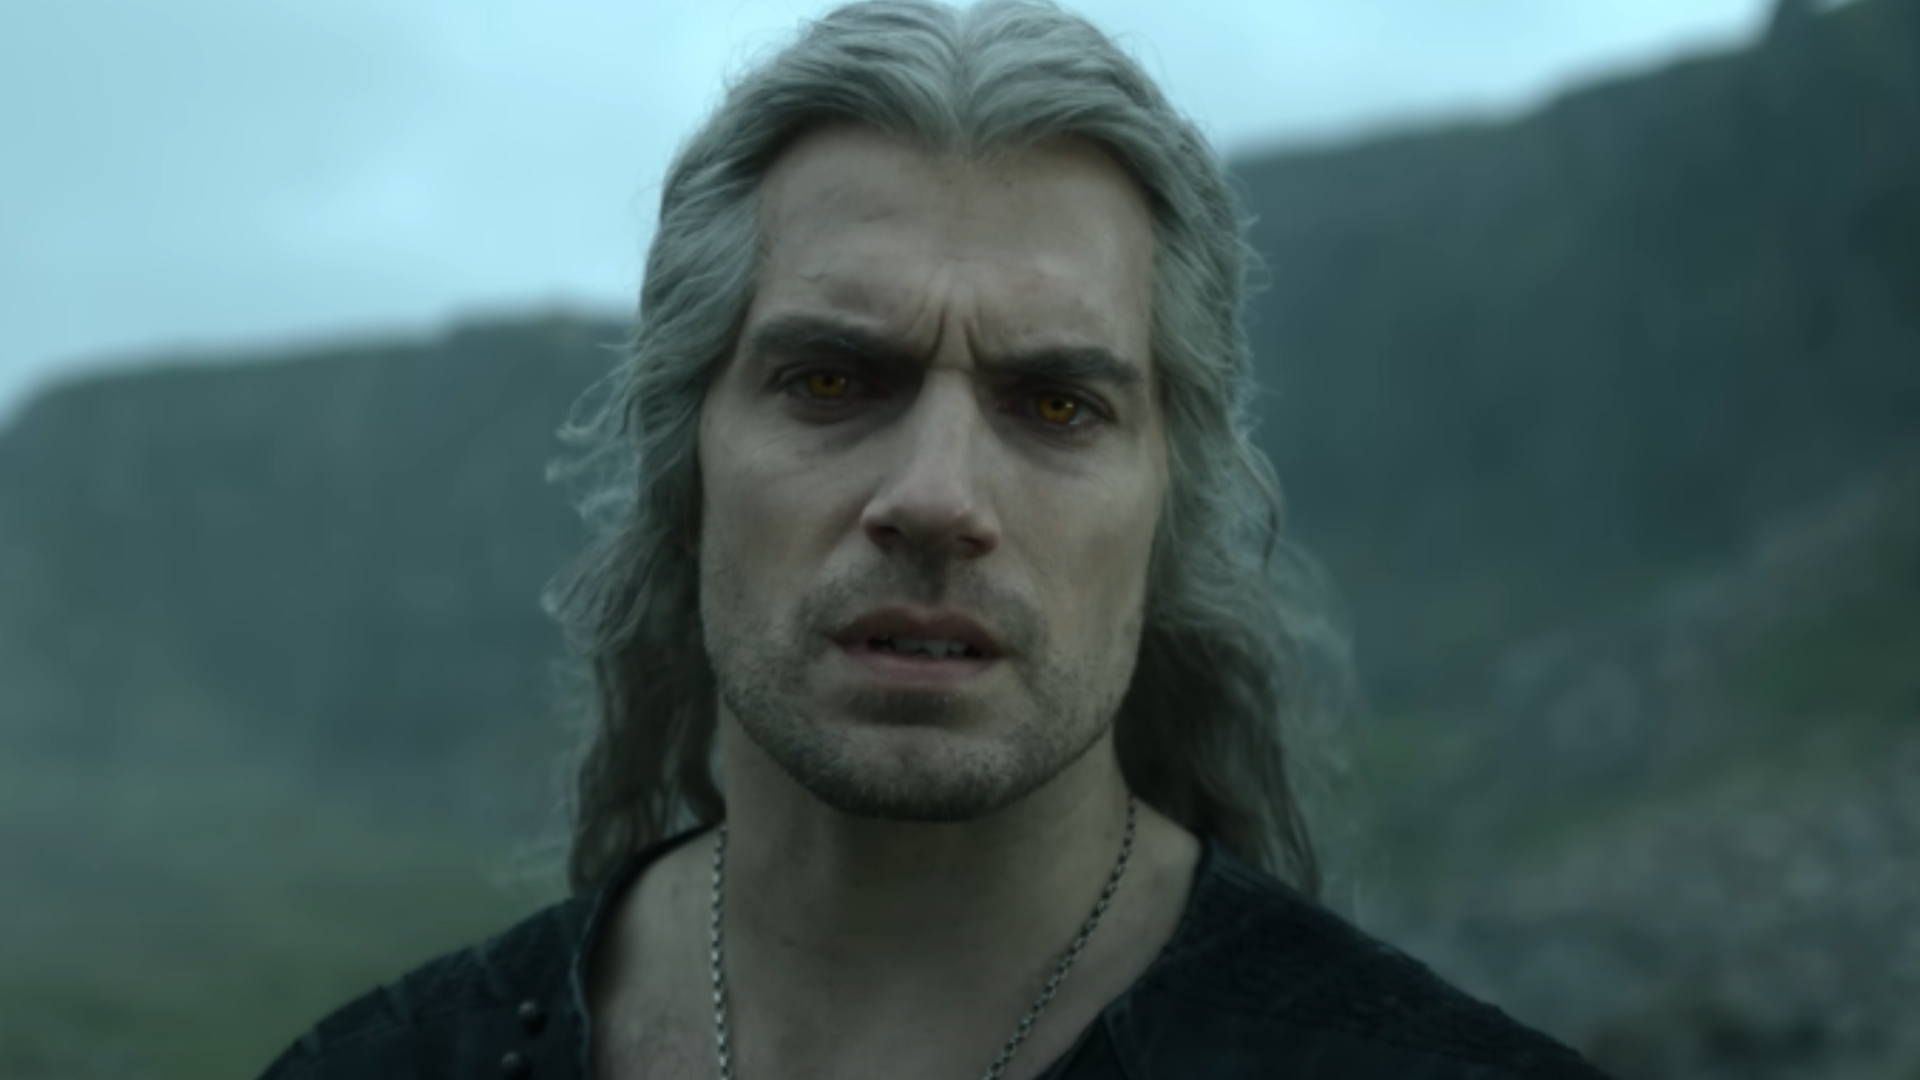 Netflix Announces THE WITCHER: SIRENS OF THE DEEP Prequel Anime